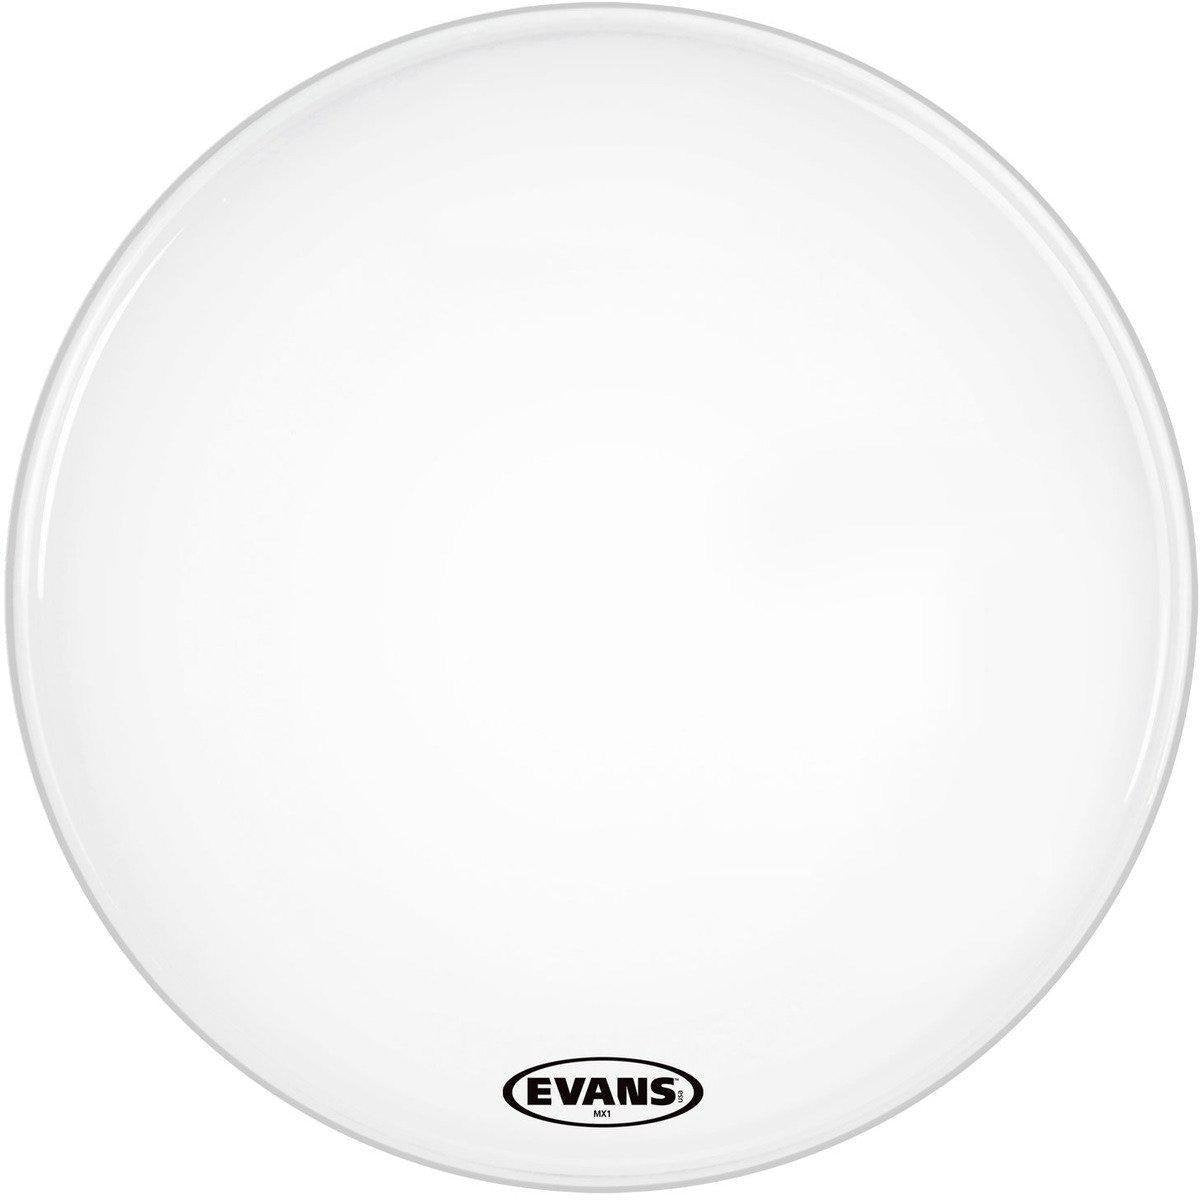 Evans MX 1 White Marching Bass Drumhead-Andy's Music